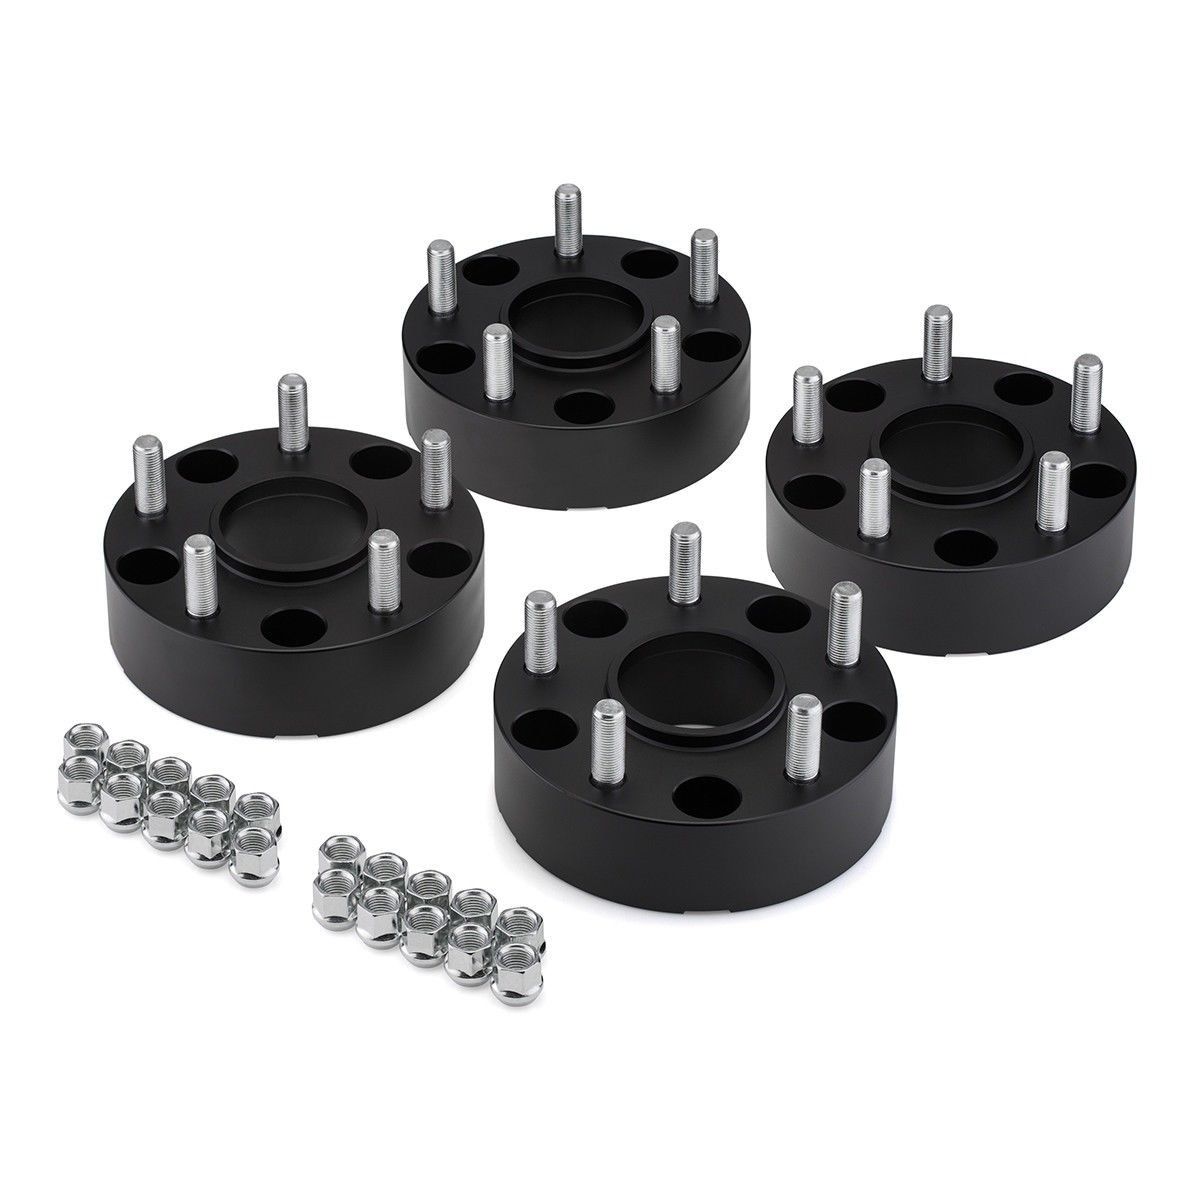 FITS 1987-1996 NISSAN 300ZX Hub-Centric Wheel Spacers Kit (4pc)